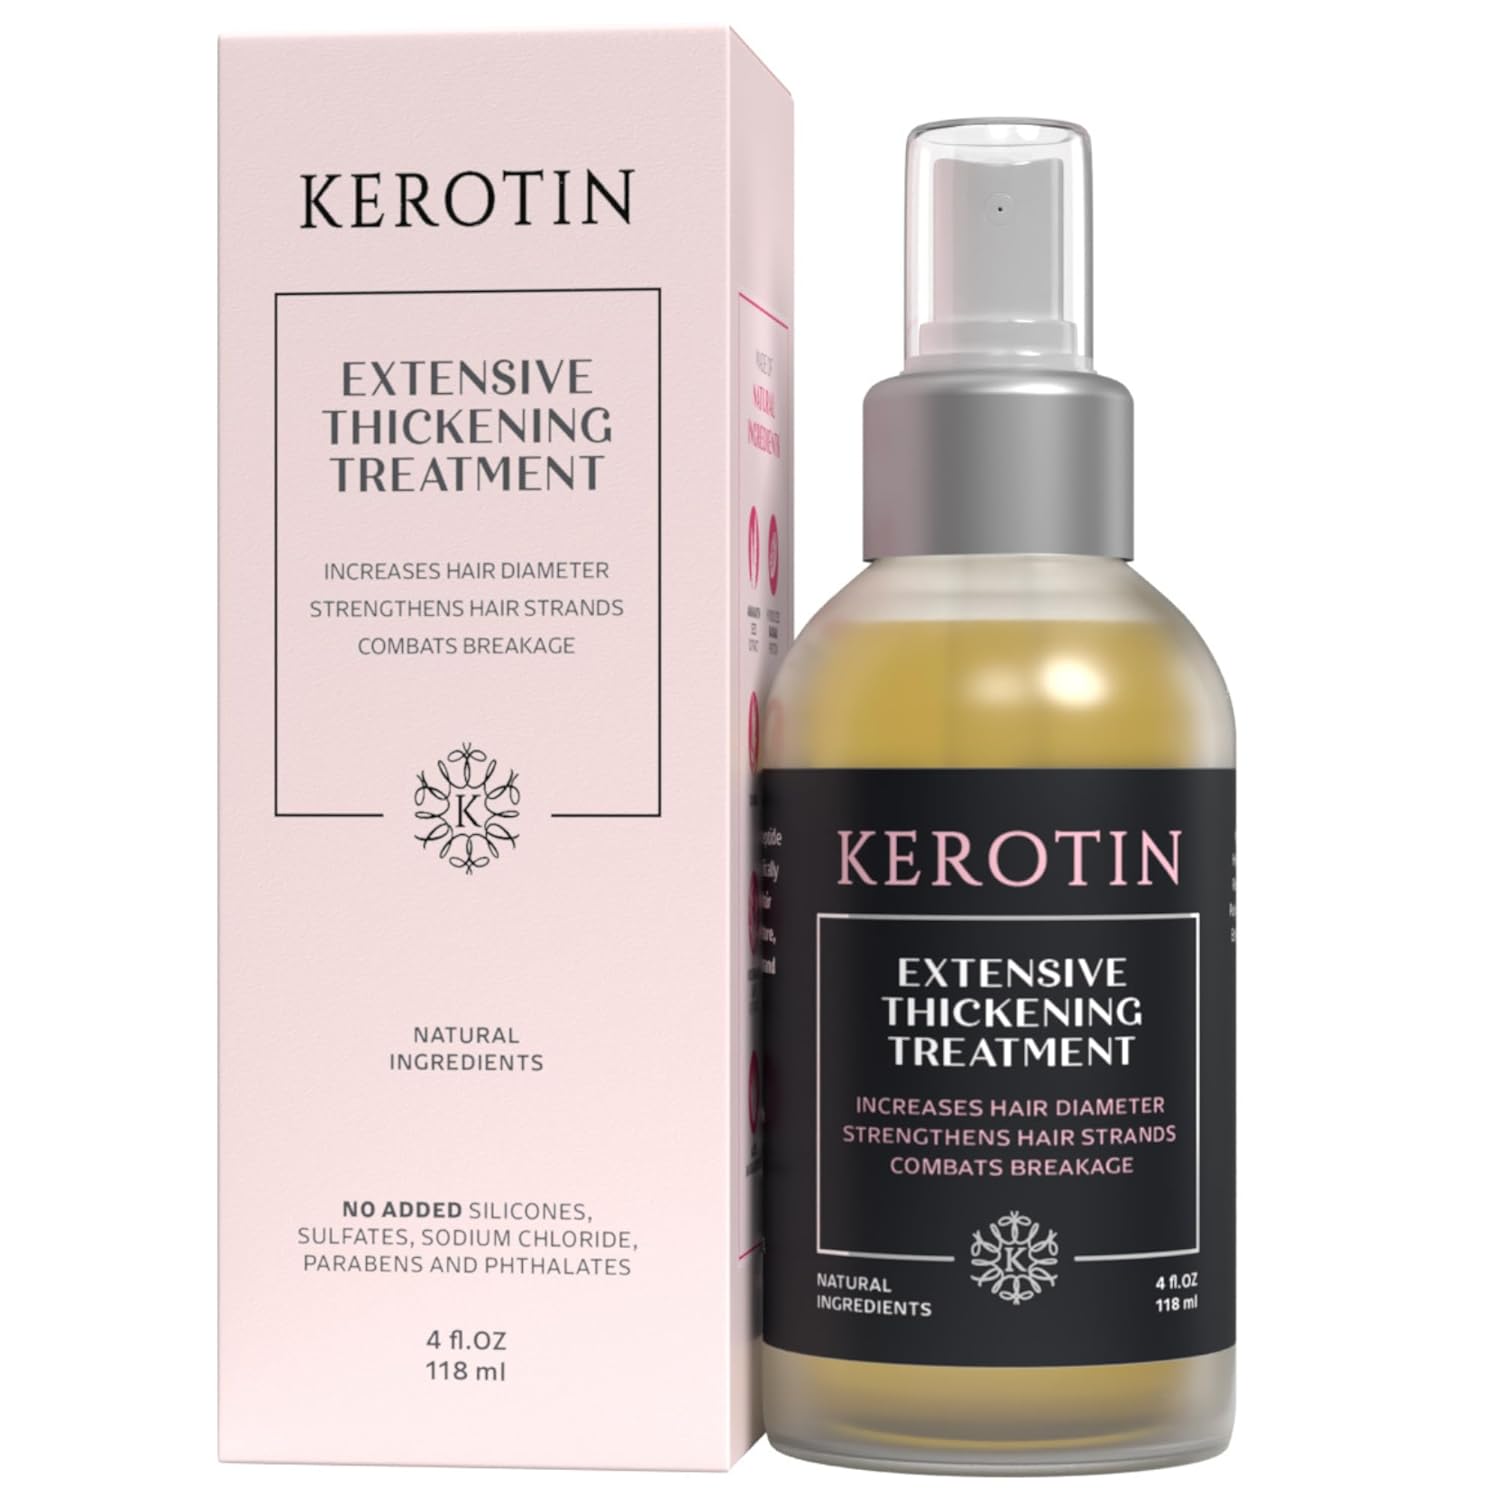 Kerotin Hair Thickening Spray with Keratin for Fine  Thin Hair Growth in Women, Heat Protectant, Repair Mist for Volume, Body  Shine, Diameter Booster, Natural, Sulfate  Cruelty Free, Made in USA